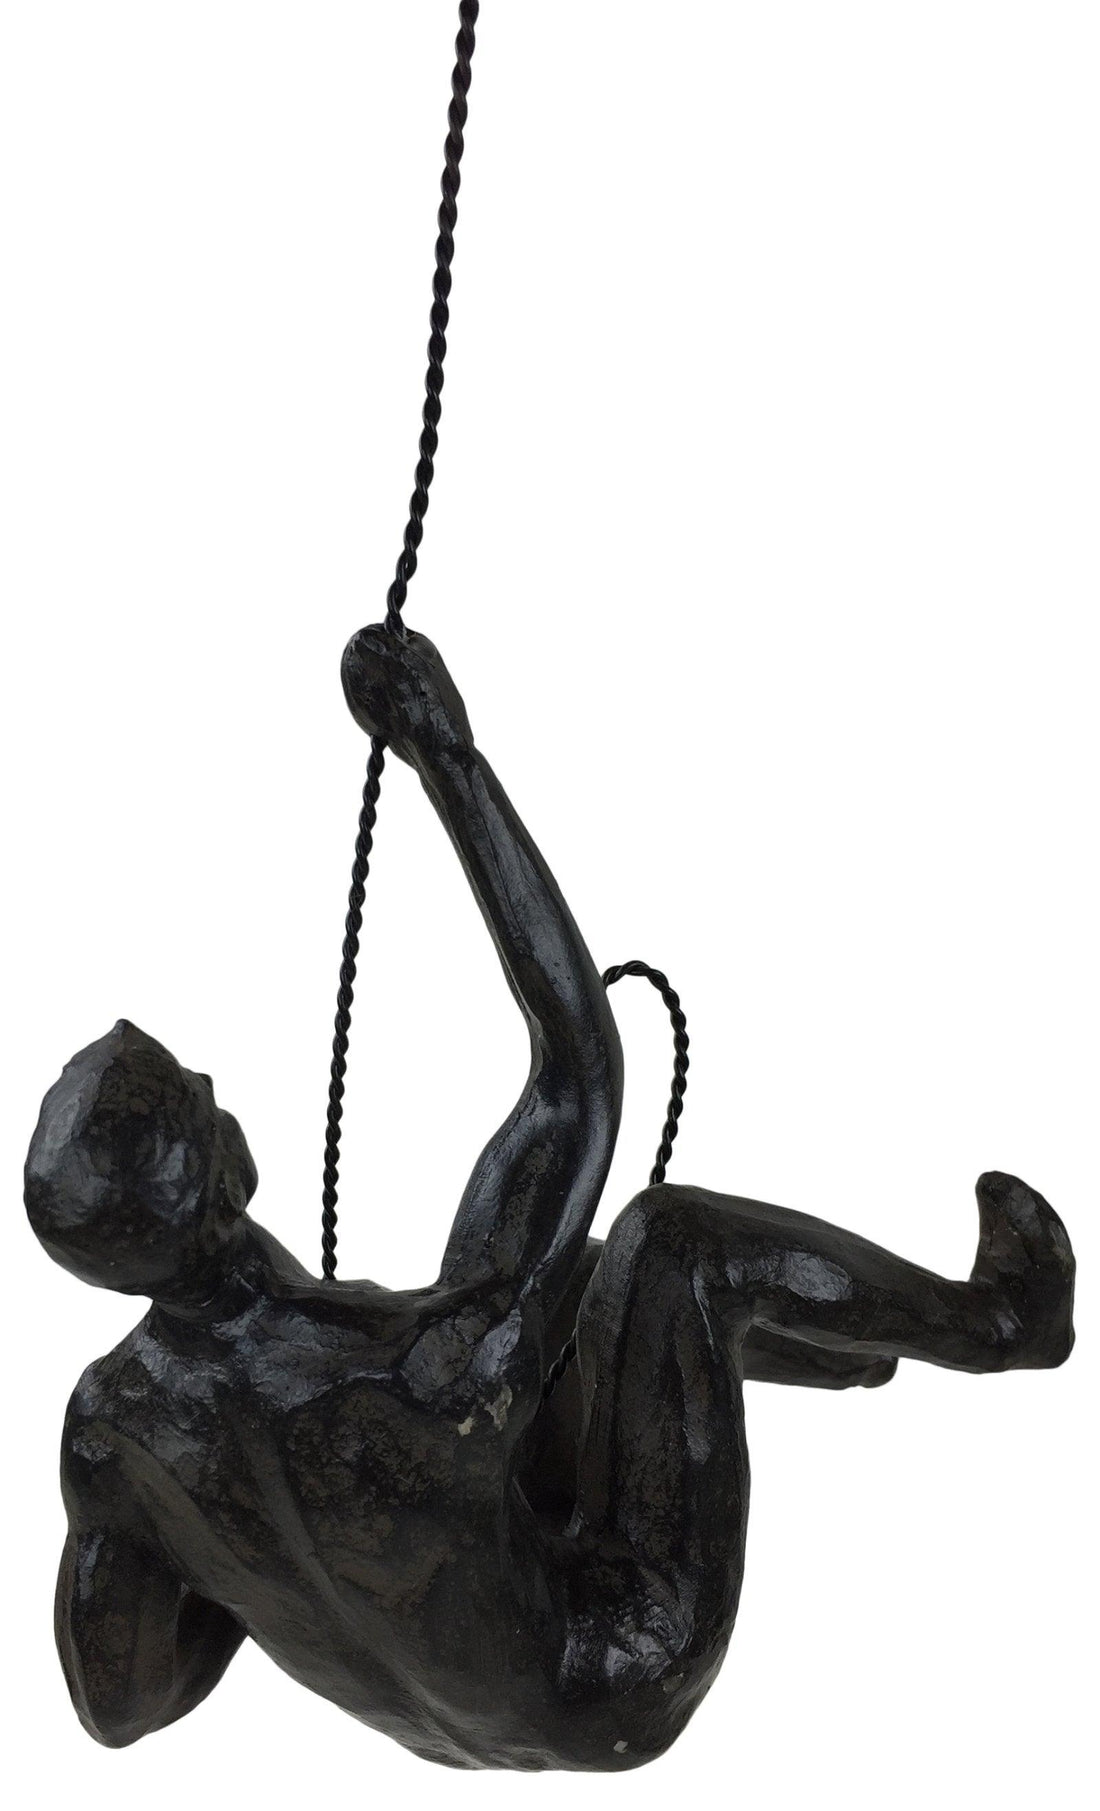 Abseiling Man Looking Up Ornament Black - £38.99 - Figurines & Statues 